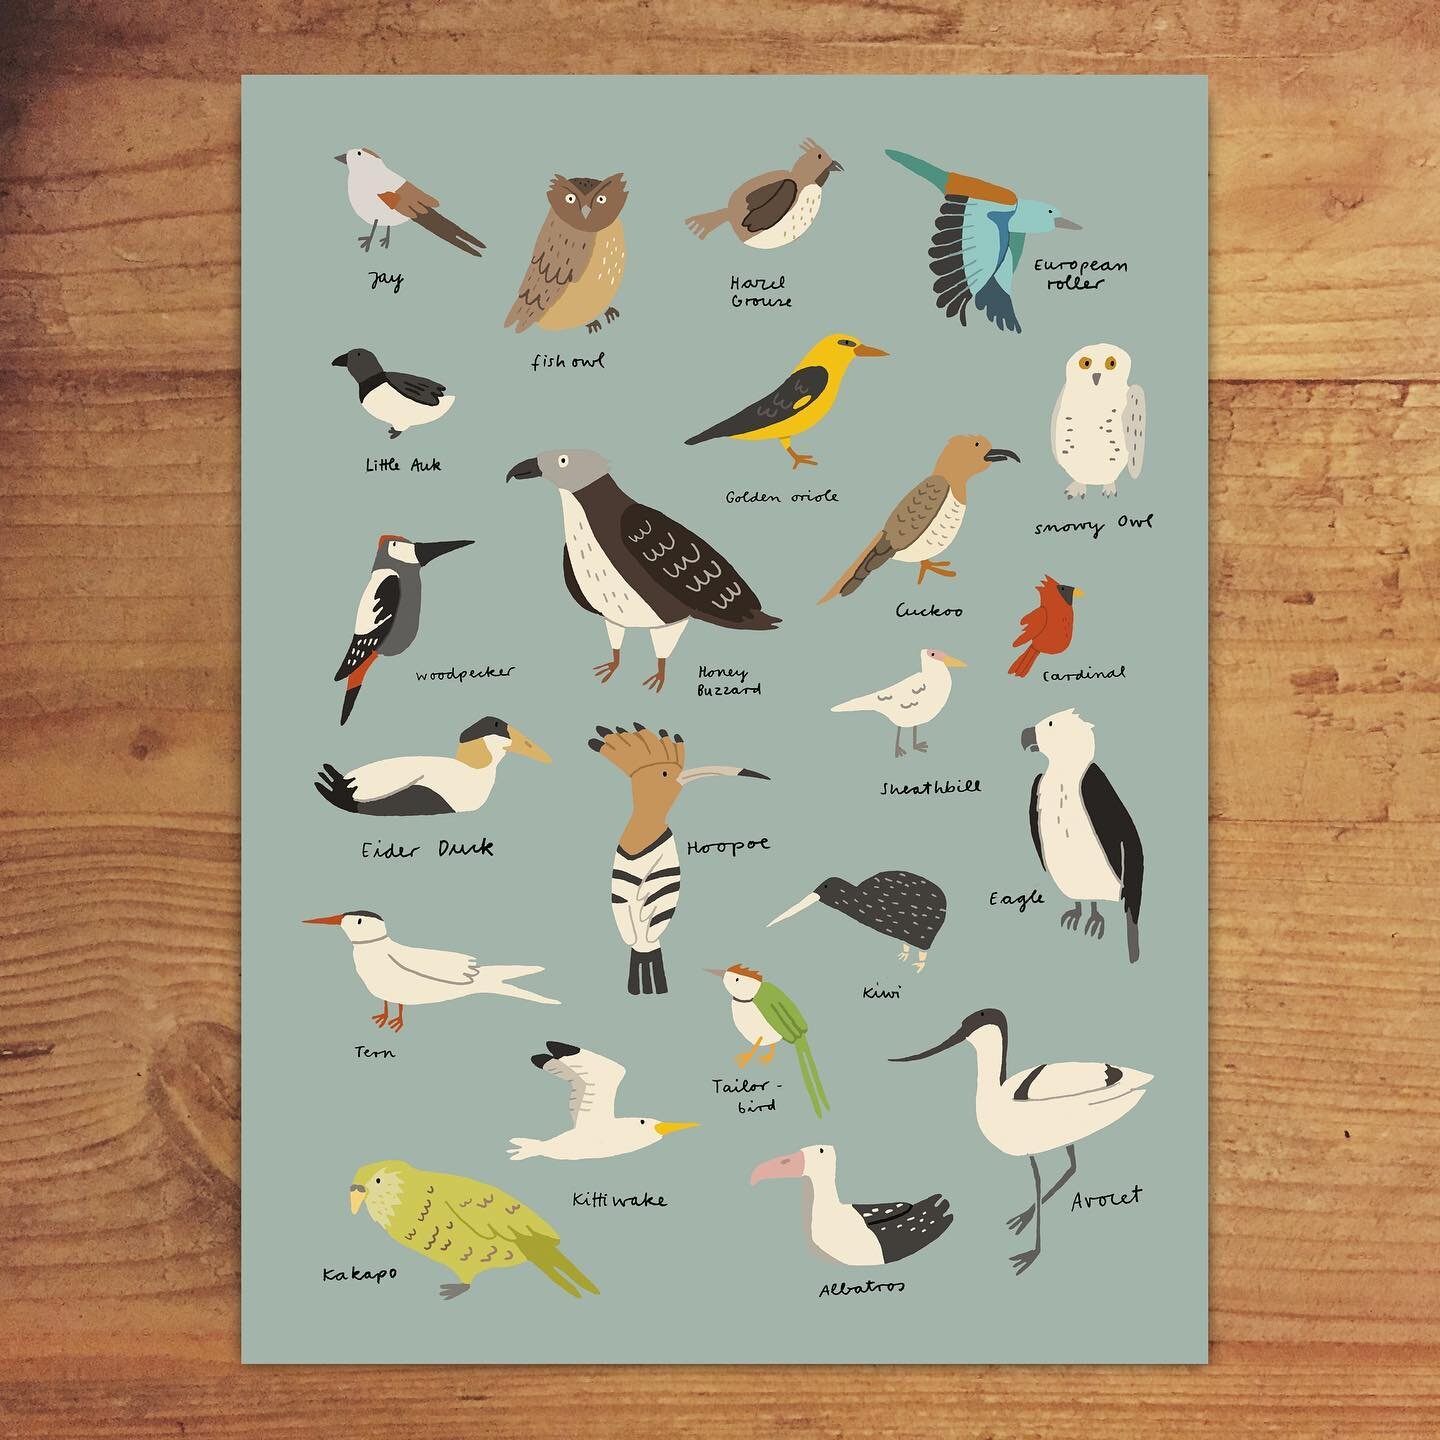 Here are some little birds for you all! 
I also thought that I should let you know that ALL of our prints are currently 40% off. More in stories and link in profile! 👋

#presentsforornithologists
#birds #v&ouml;gel #illustration #cybermonday #birdpr